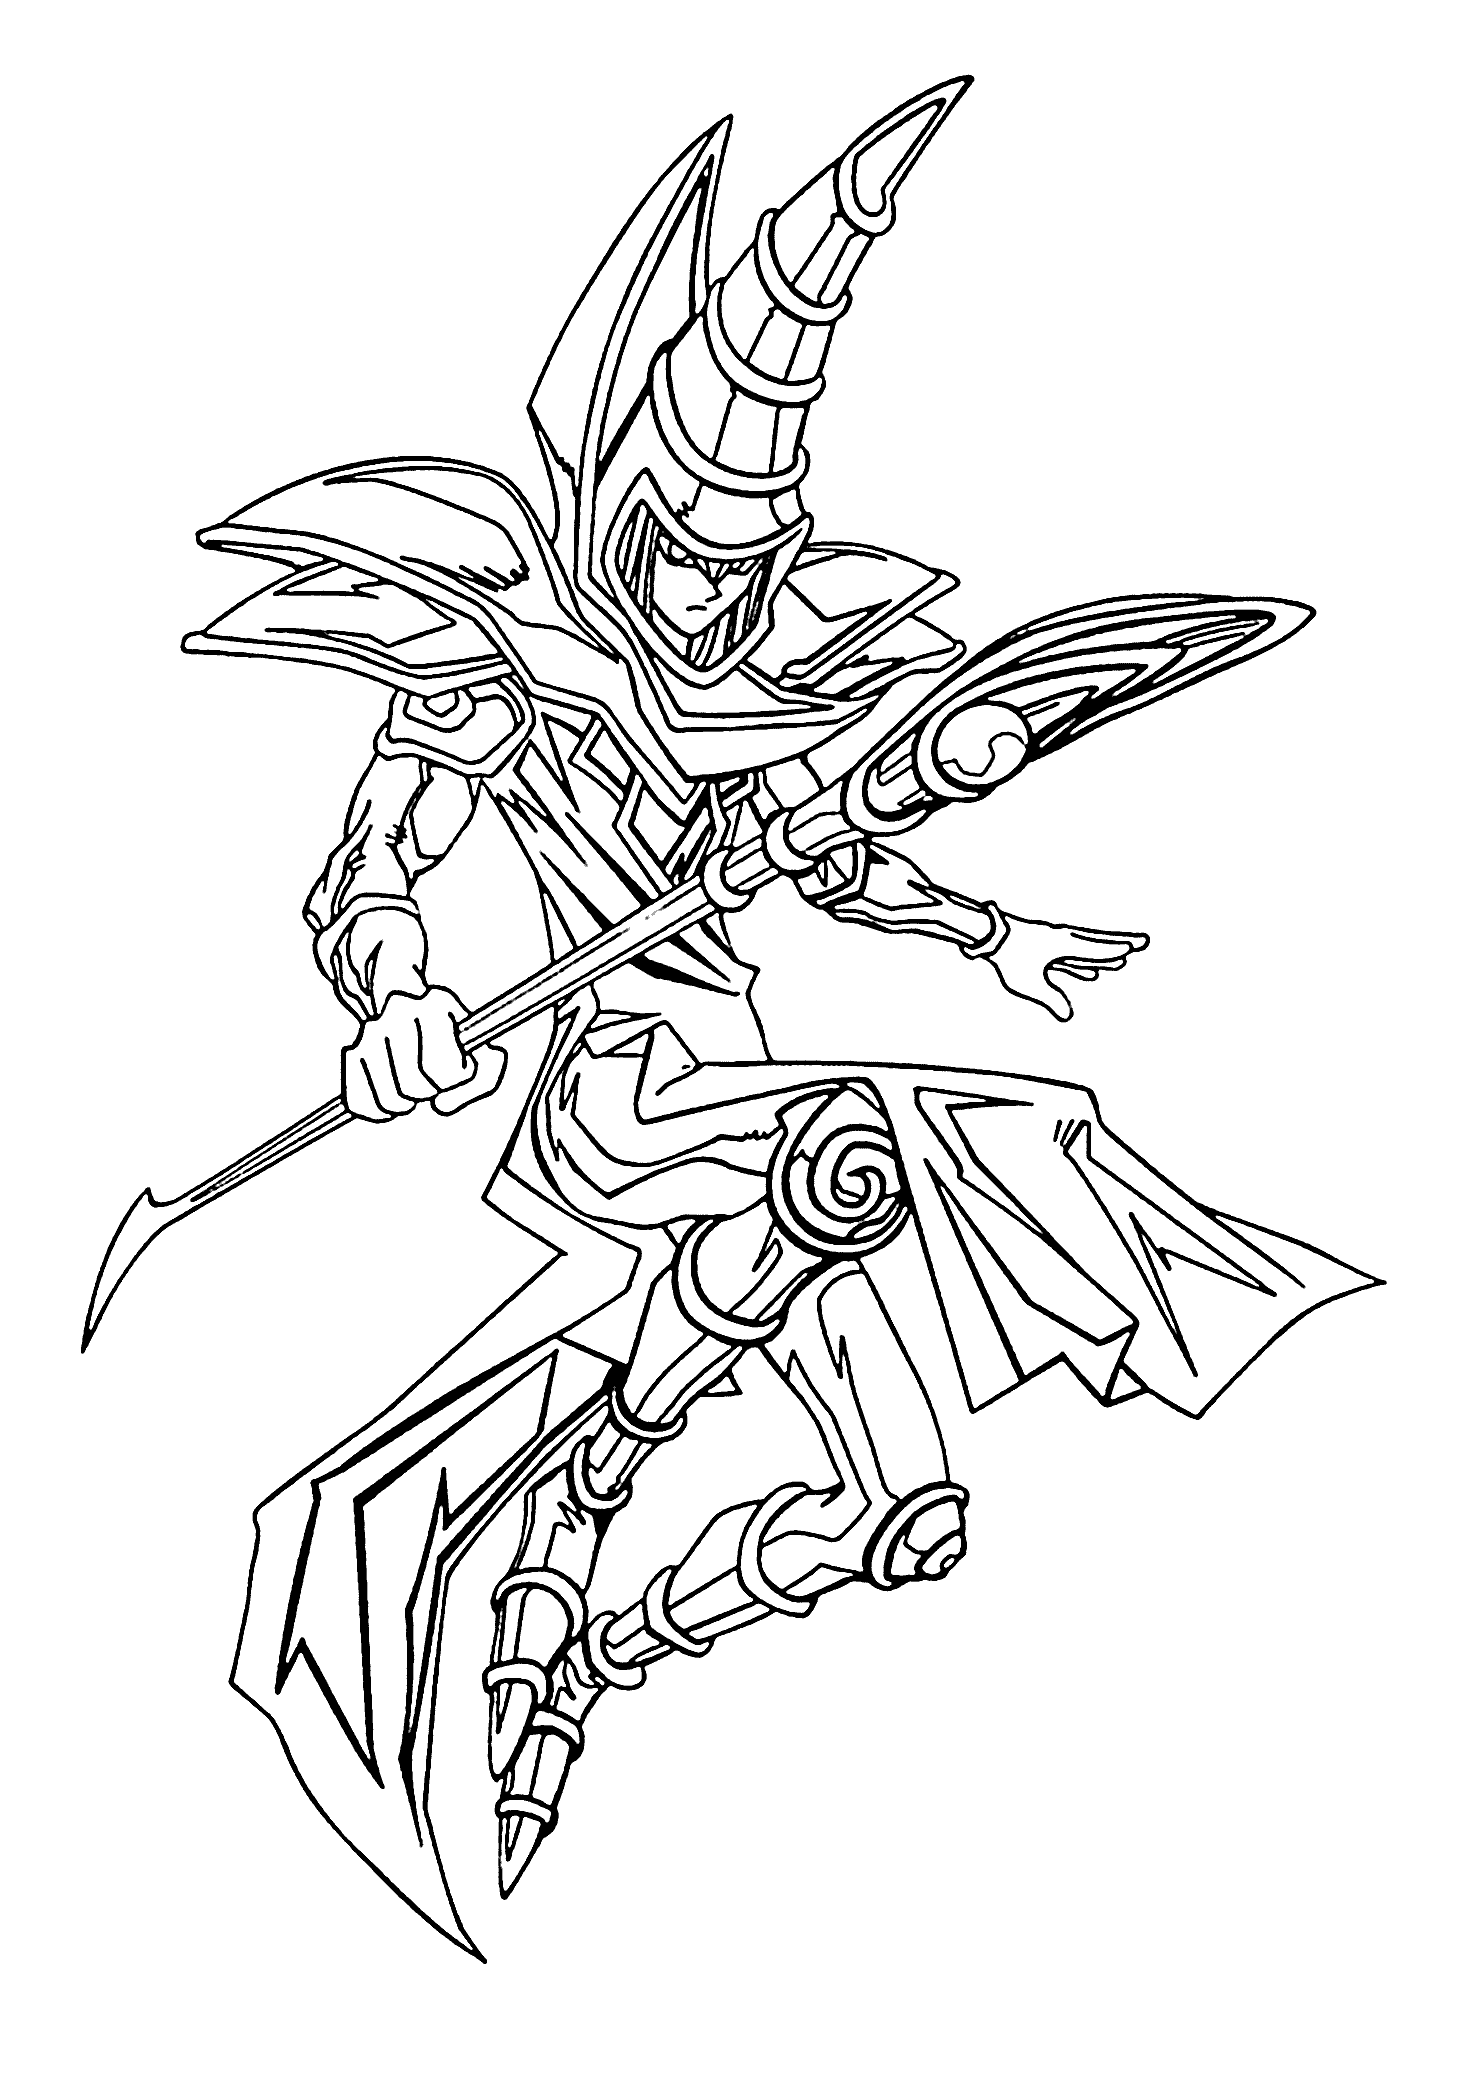 Yu Gi Oh Coloring Pages For Kids Printable Free Monster Coloring Pages Cartoon Colori